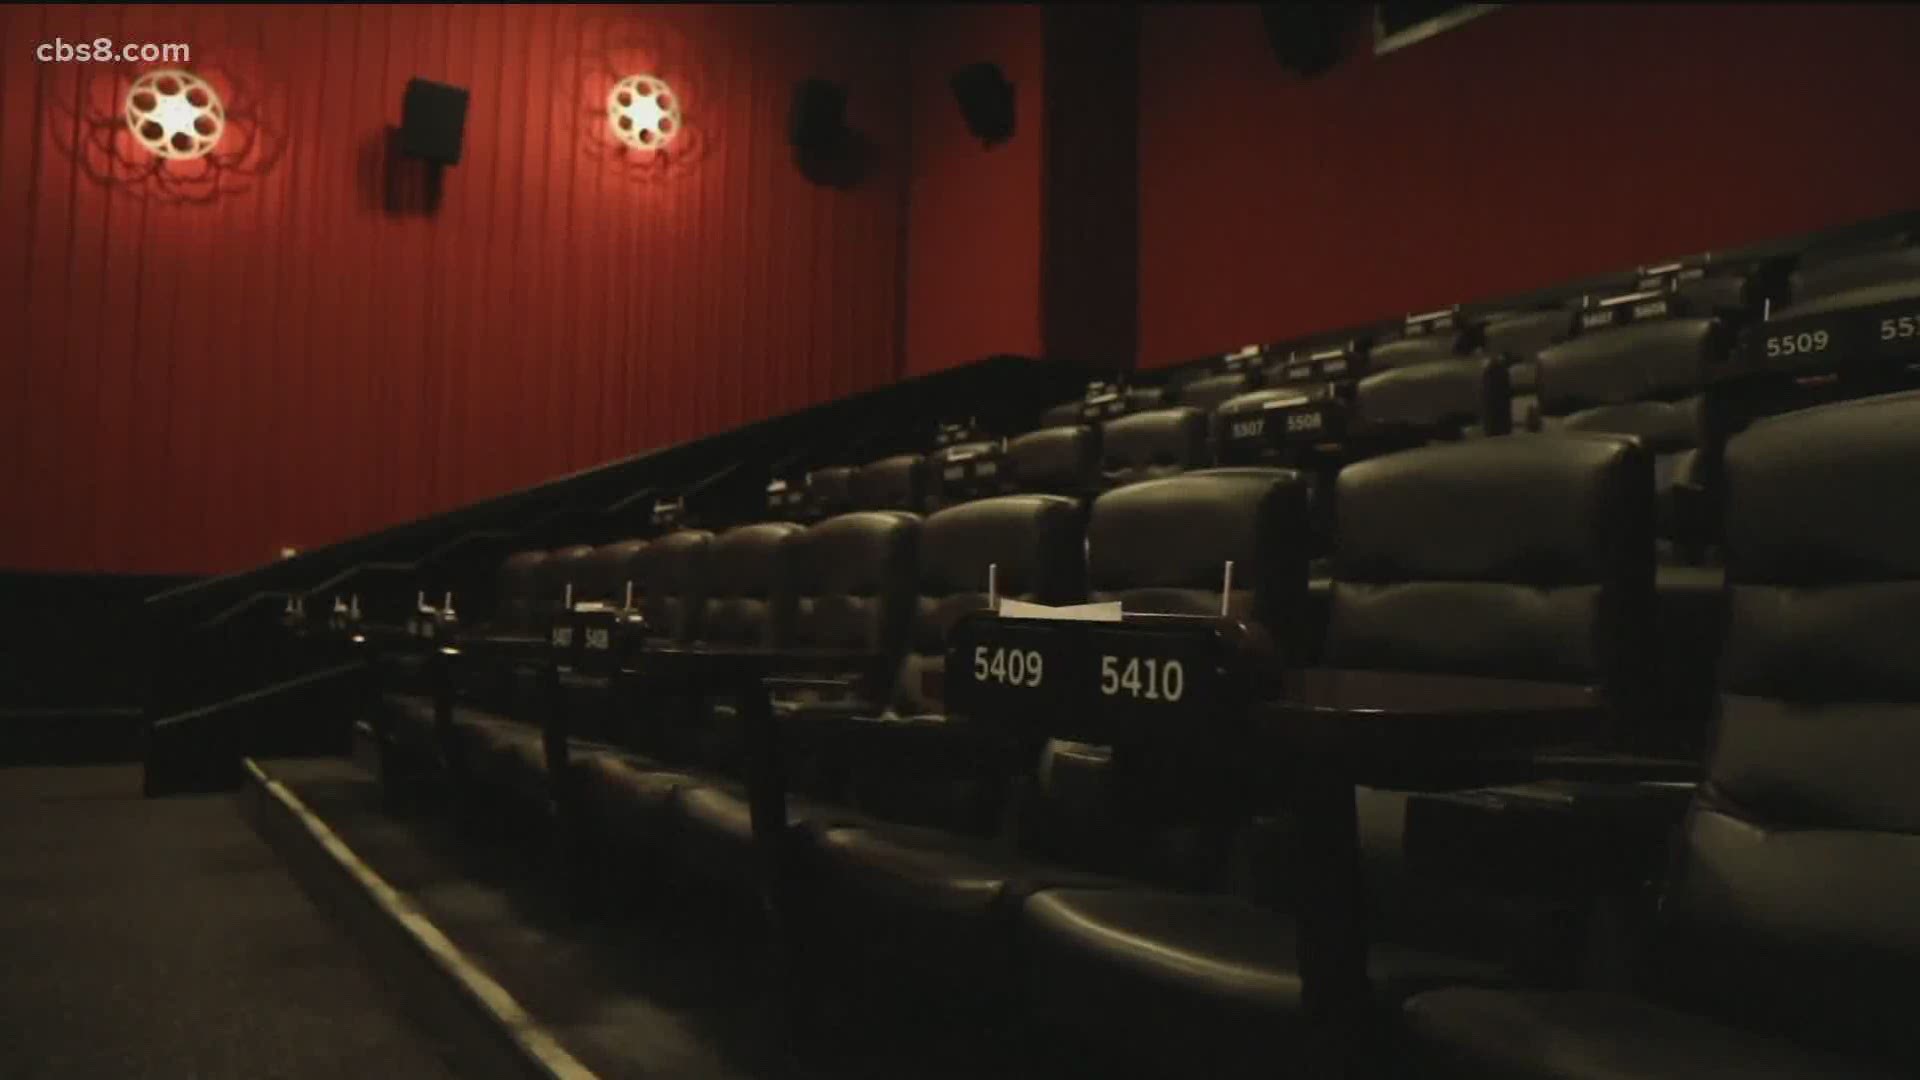 Movie theater operators must limit the number of attendees in each theater to 25% of theater capacity or a maximum of 100 guests, whichever number is lower.